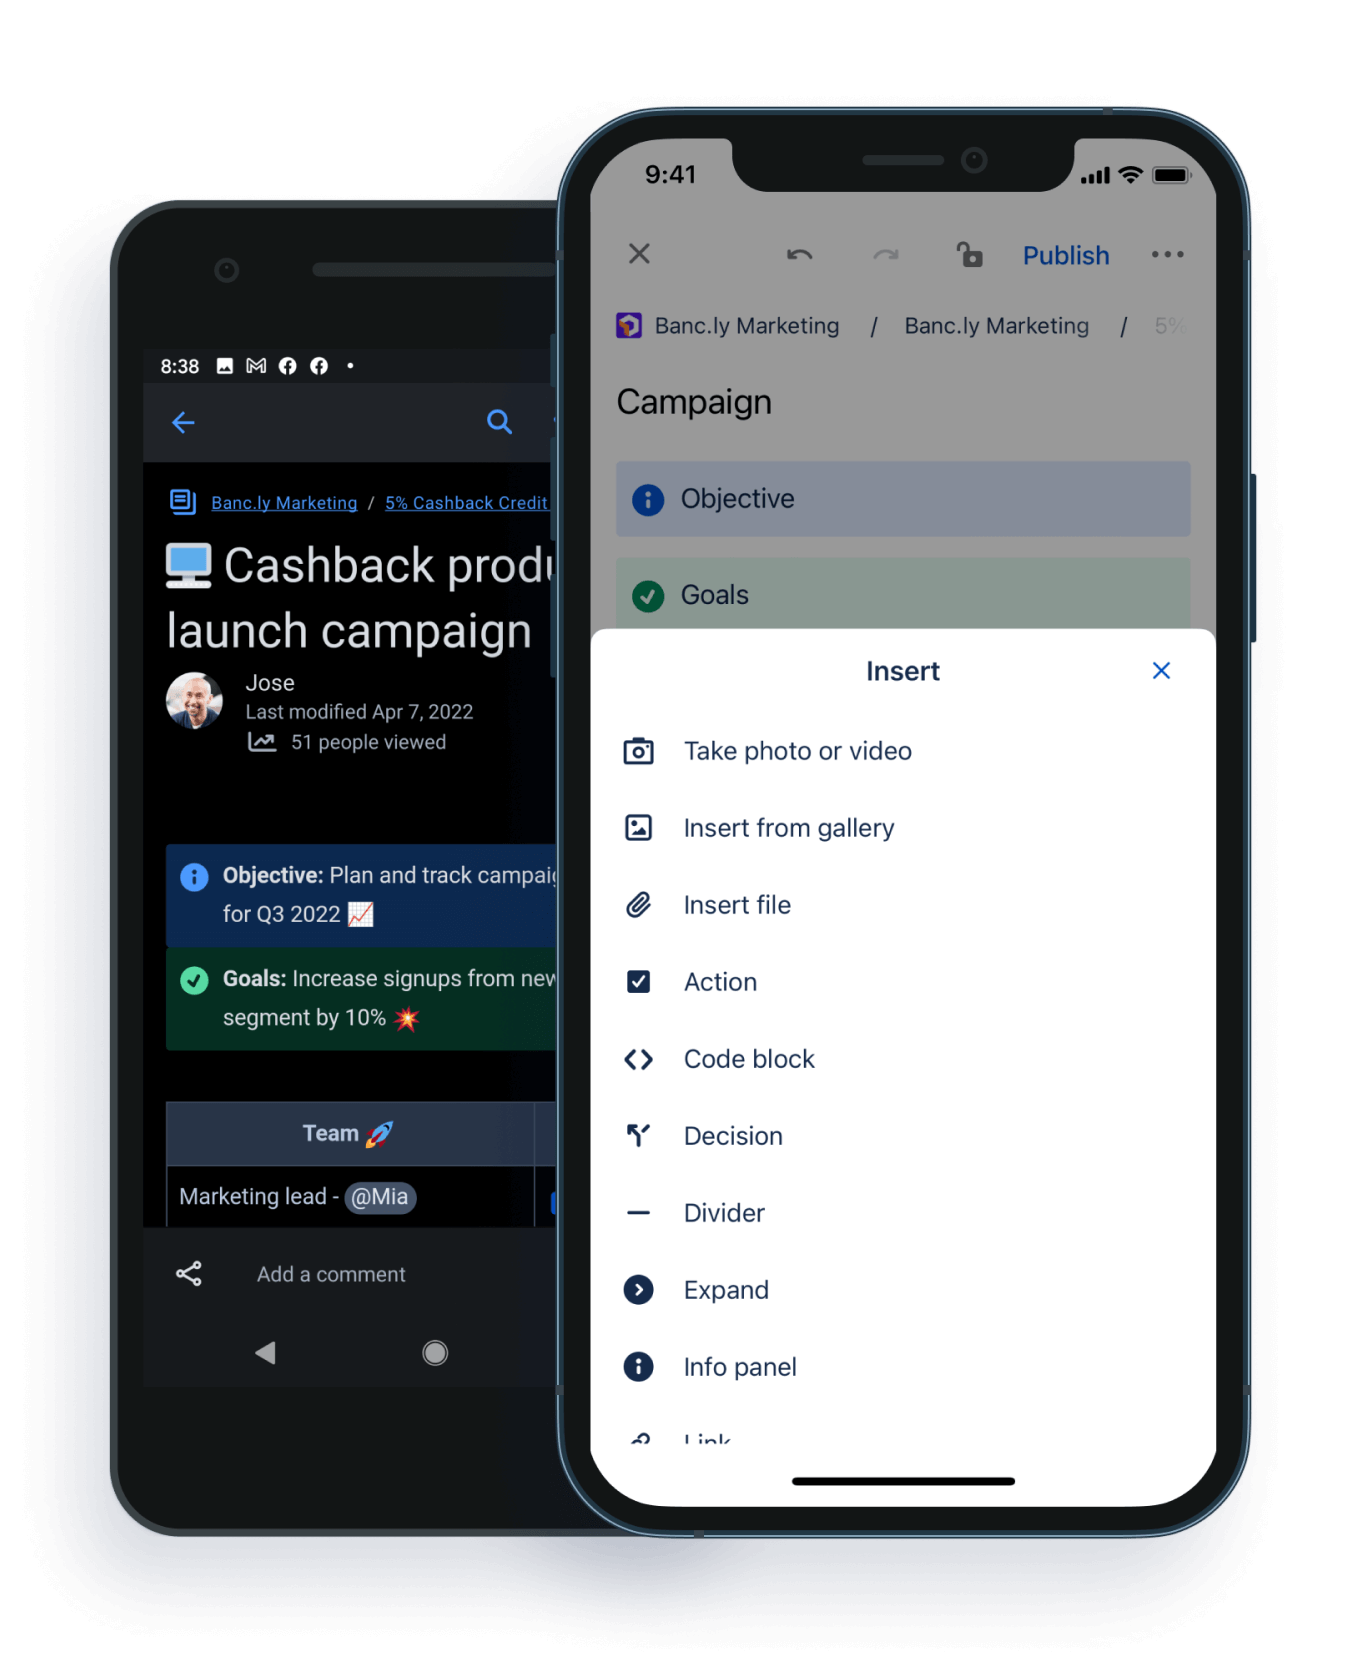 Example menu options in Confluence Mobile